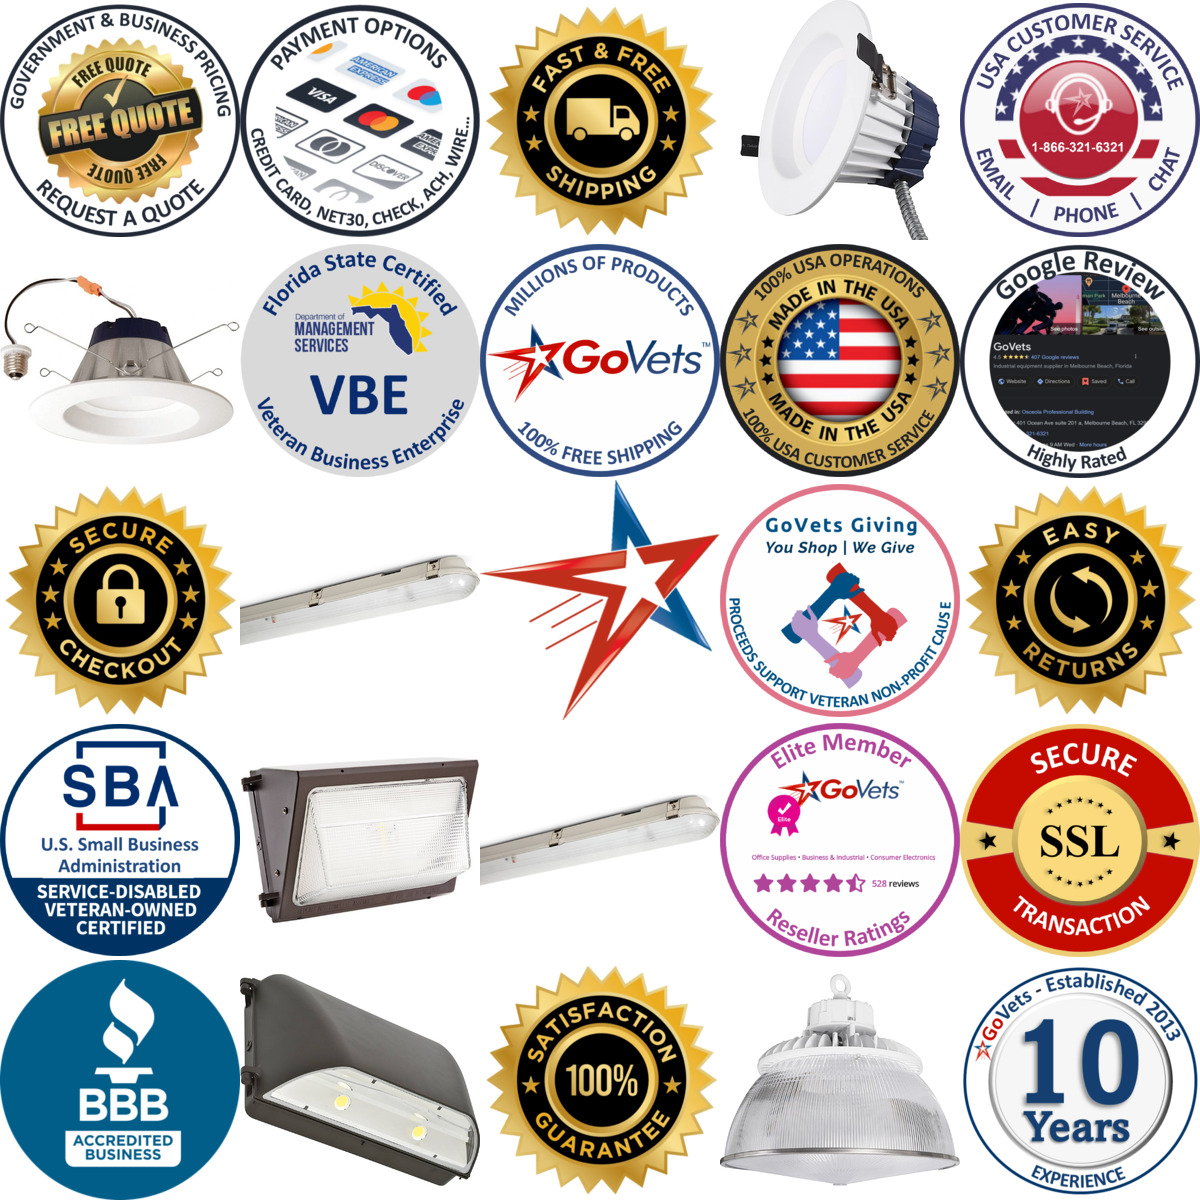 A selection of Lamps and Light Bulbs products on GoVets